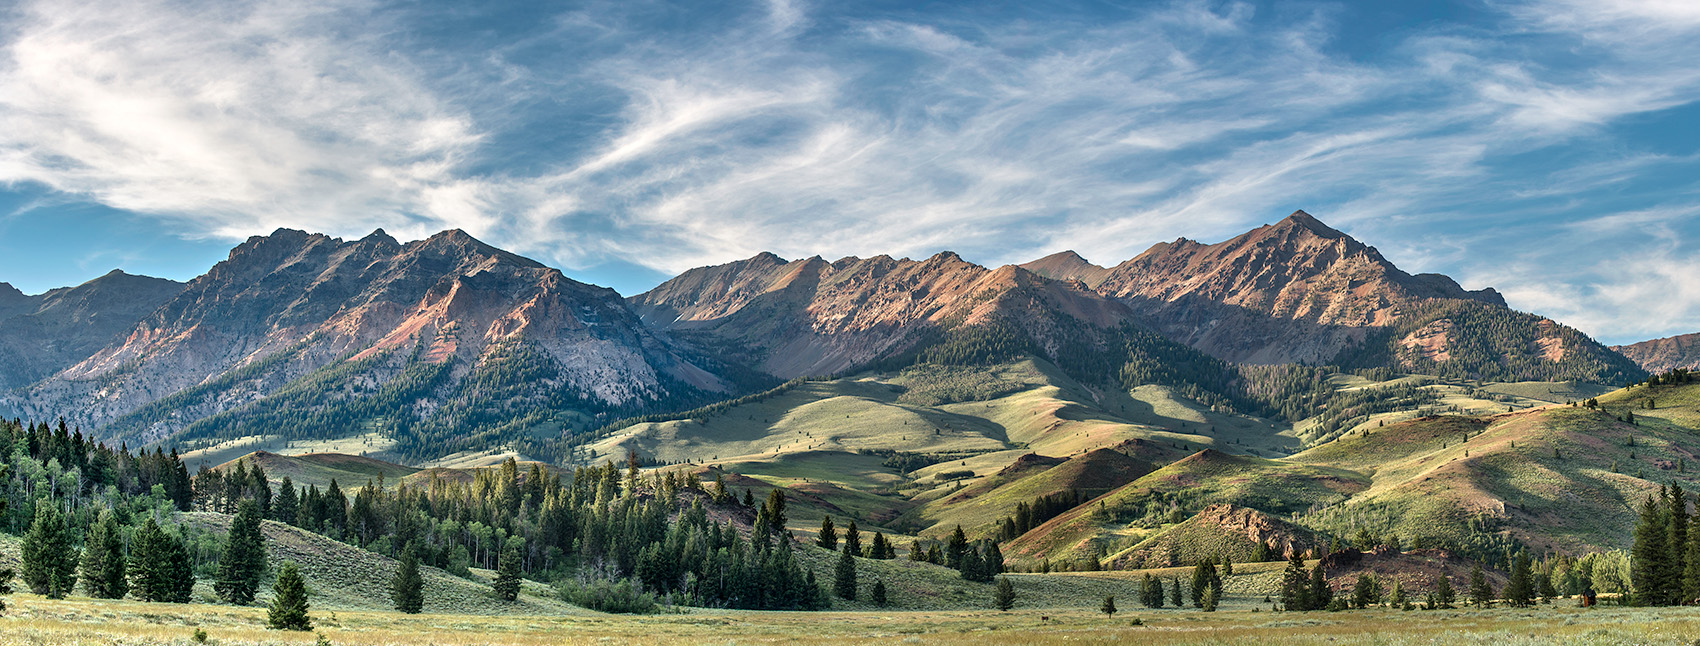 Landscape photo of Sawtooth Mountains